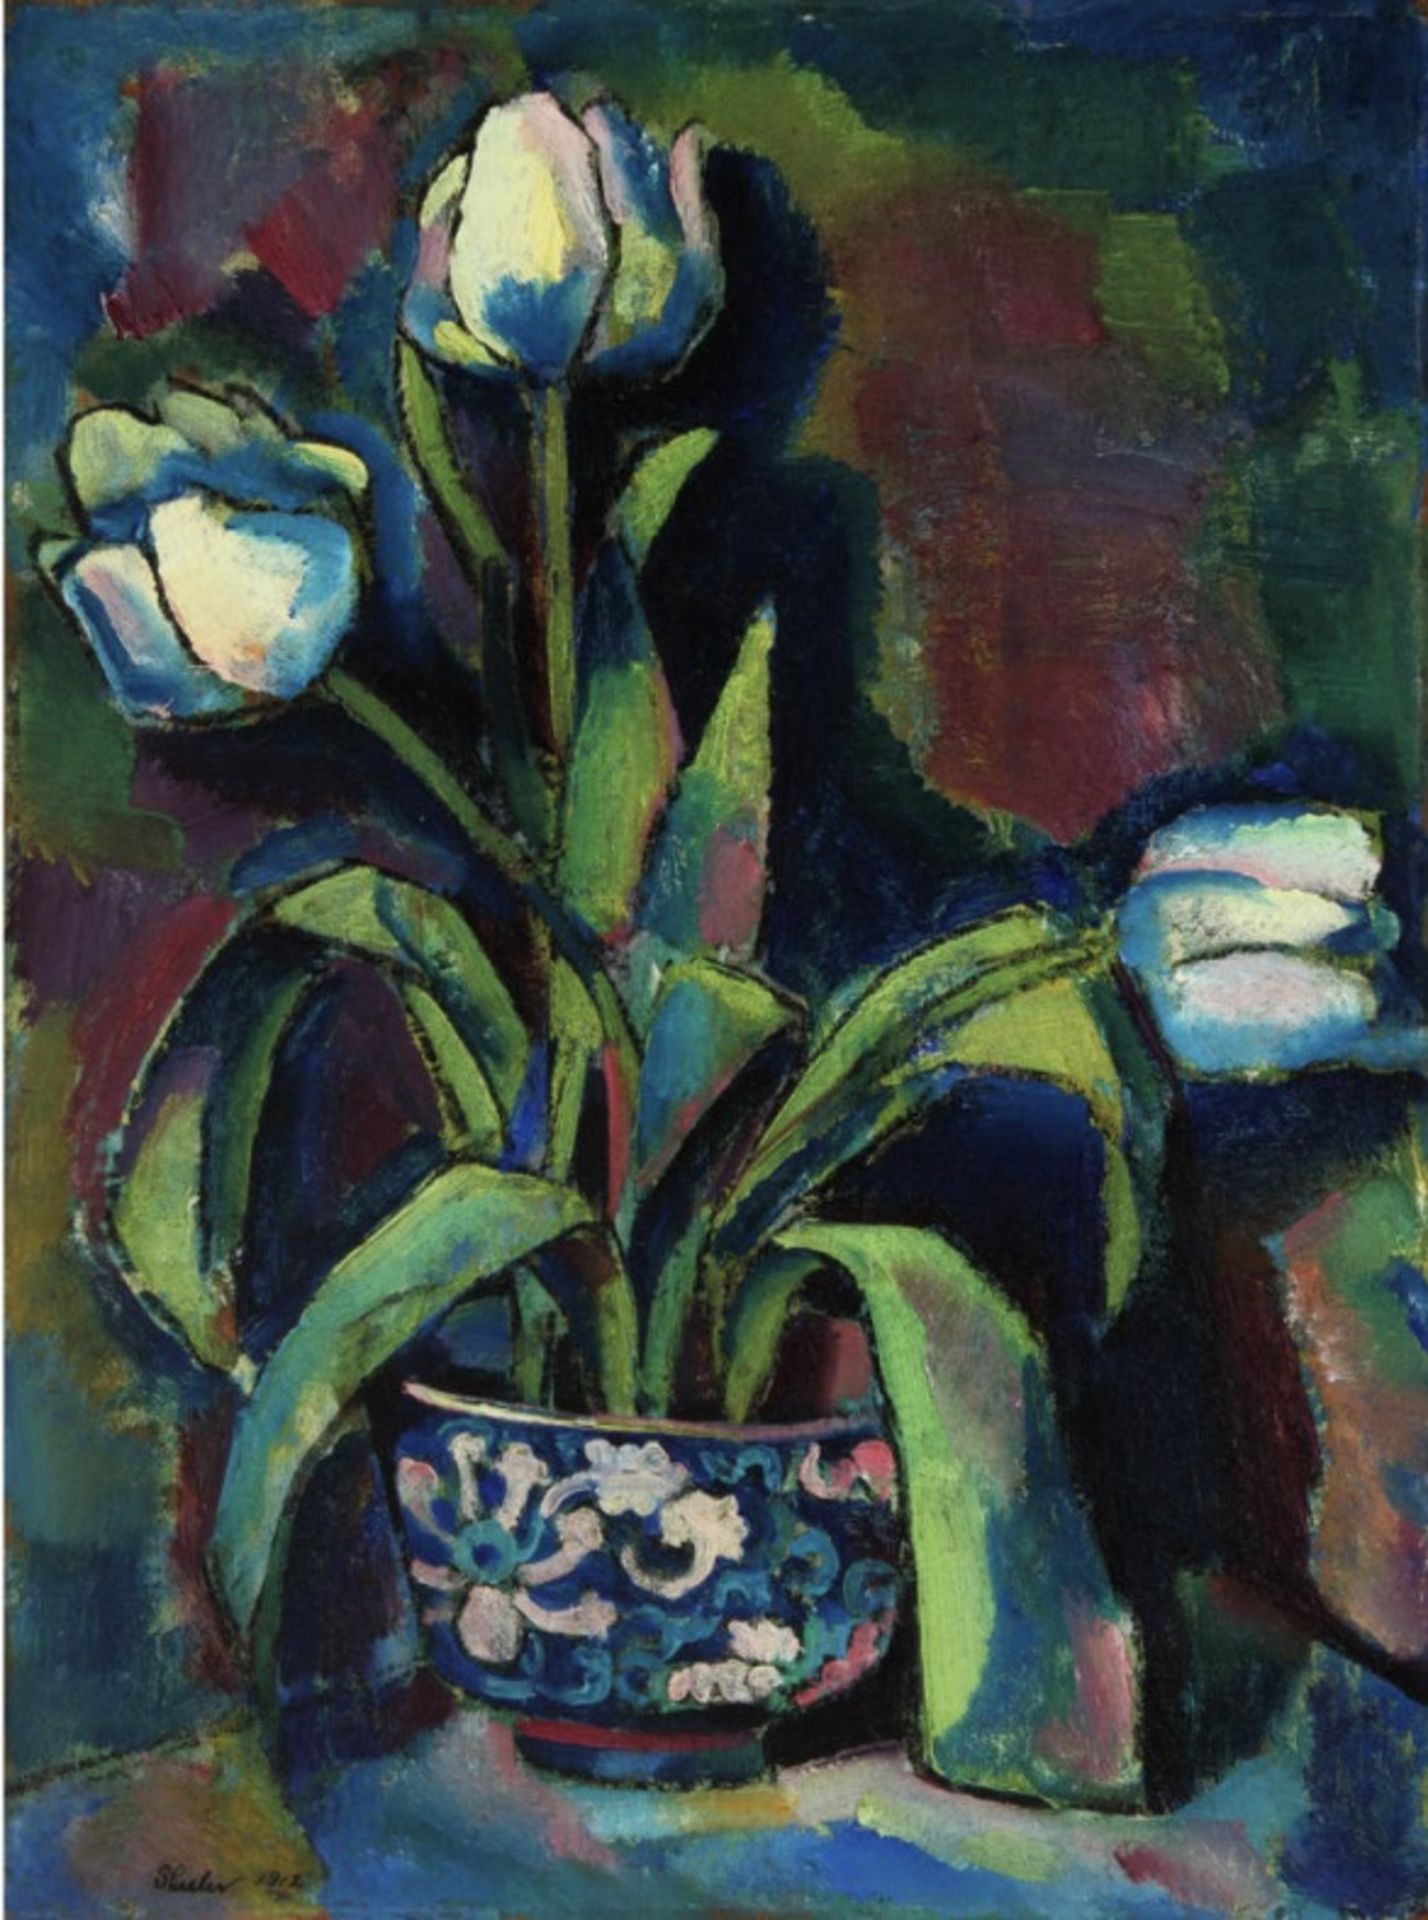 Charles Sheeler "White Tulips, 1912" Offset Lithograph